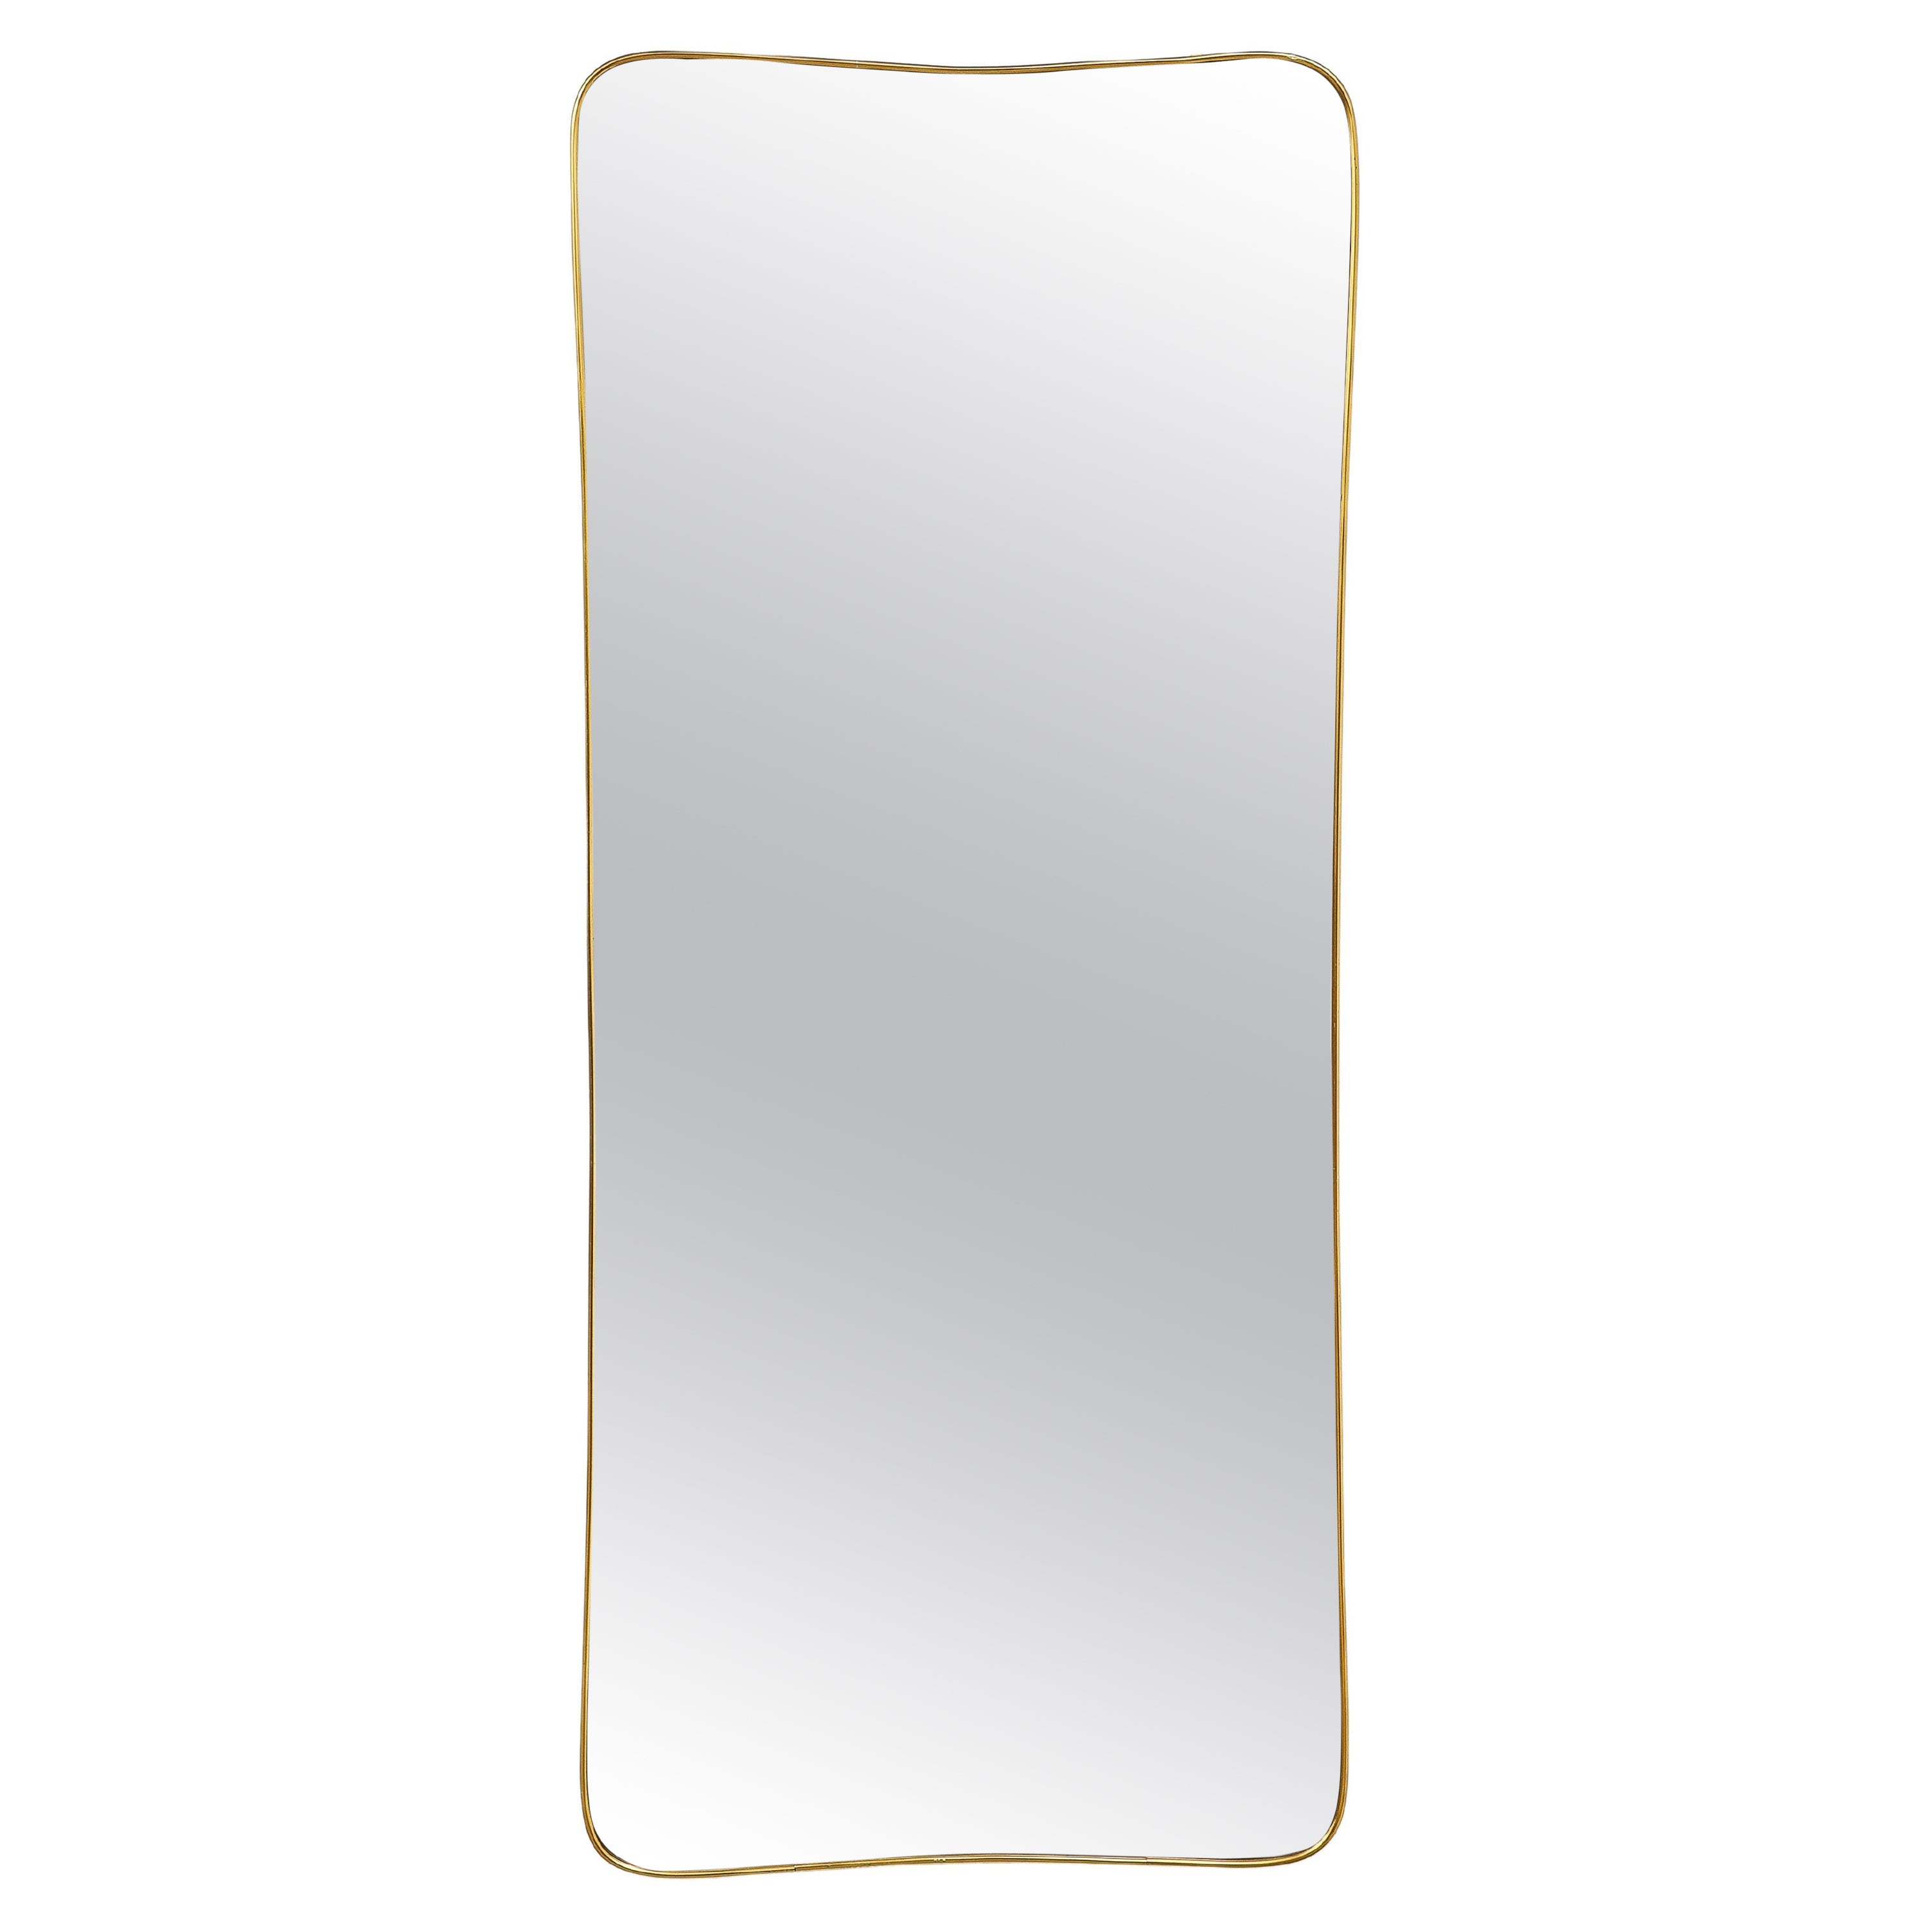 Gio Ponti Style Modernist Dressing Mirror, Italy, 1950's For Sale